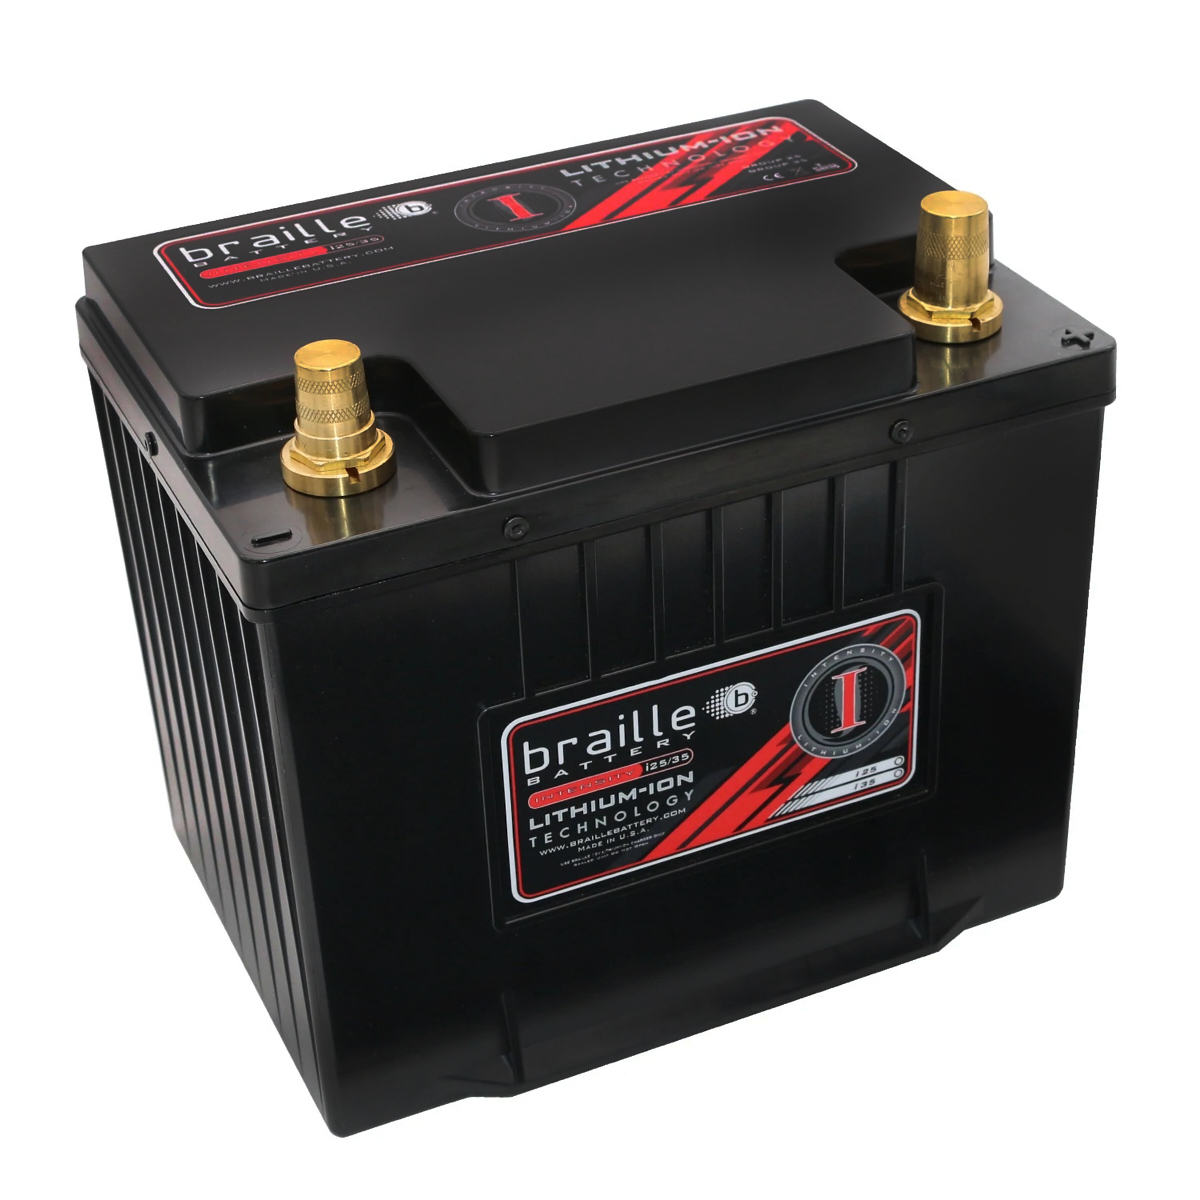 Picture of Braille Auto Battery BRBI35X 12V Lithium Intensity Light Weight Battery